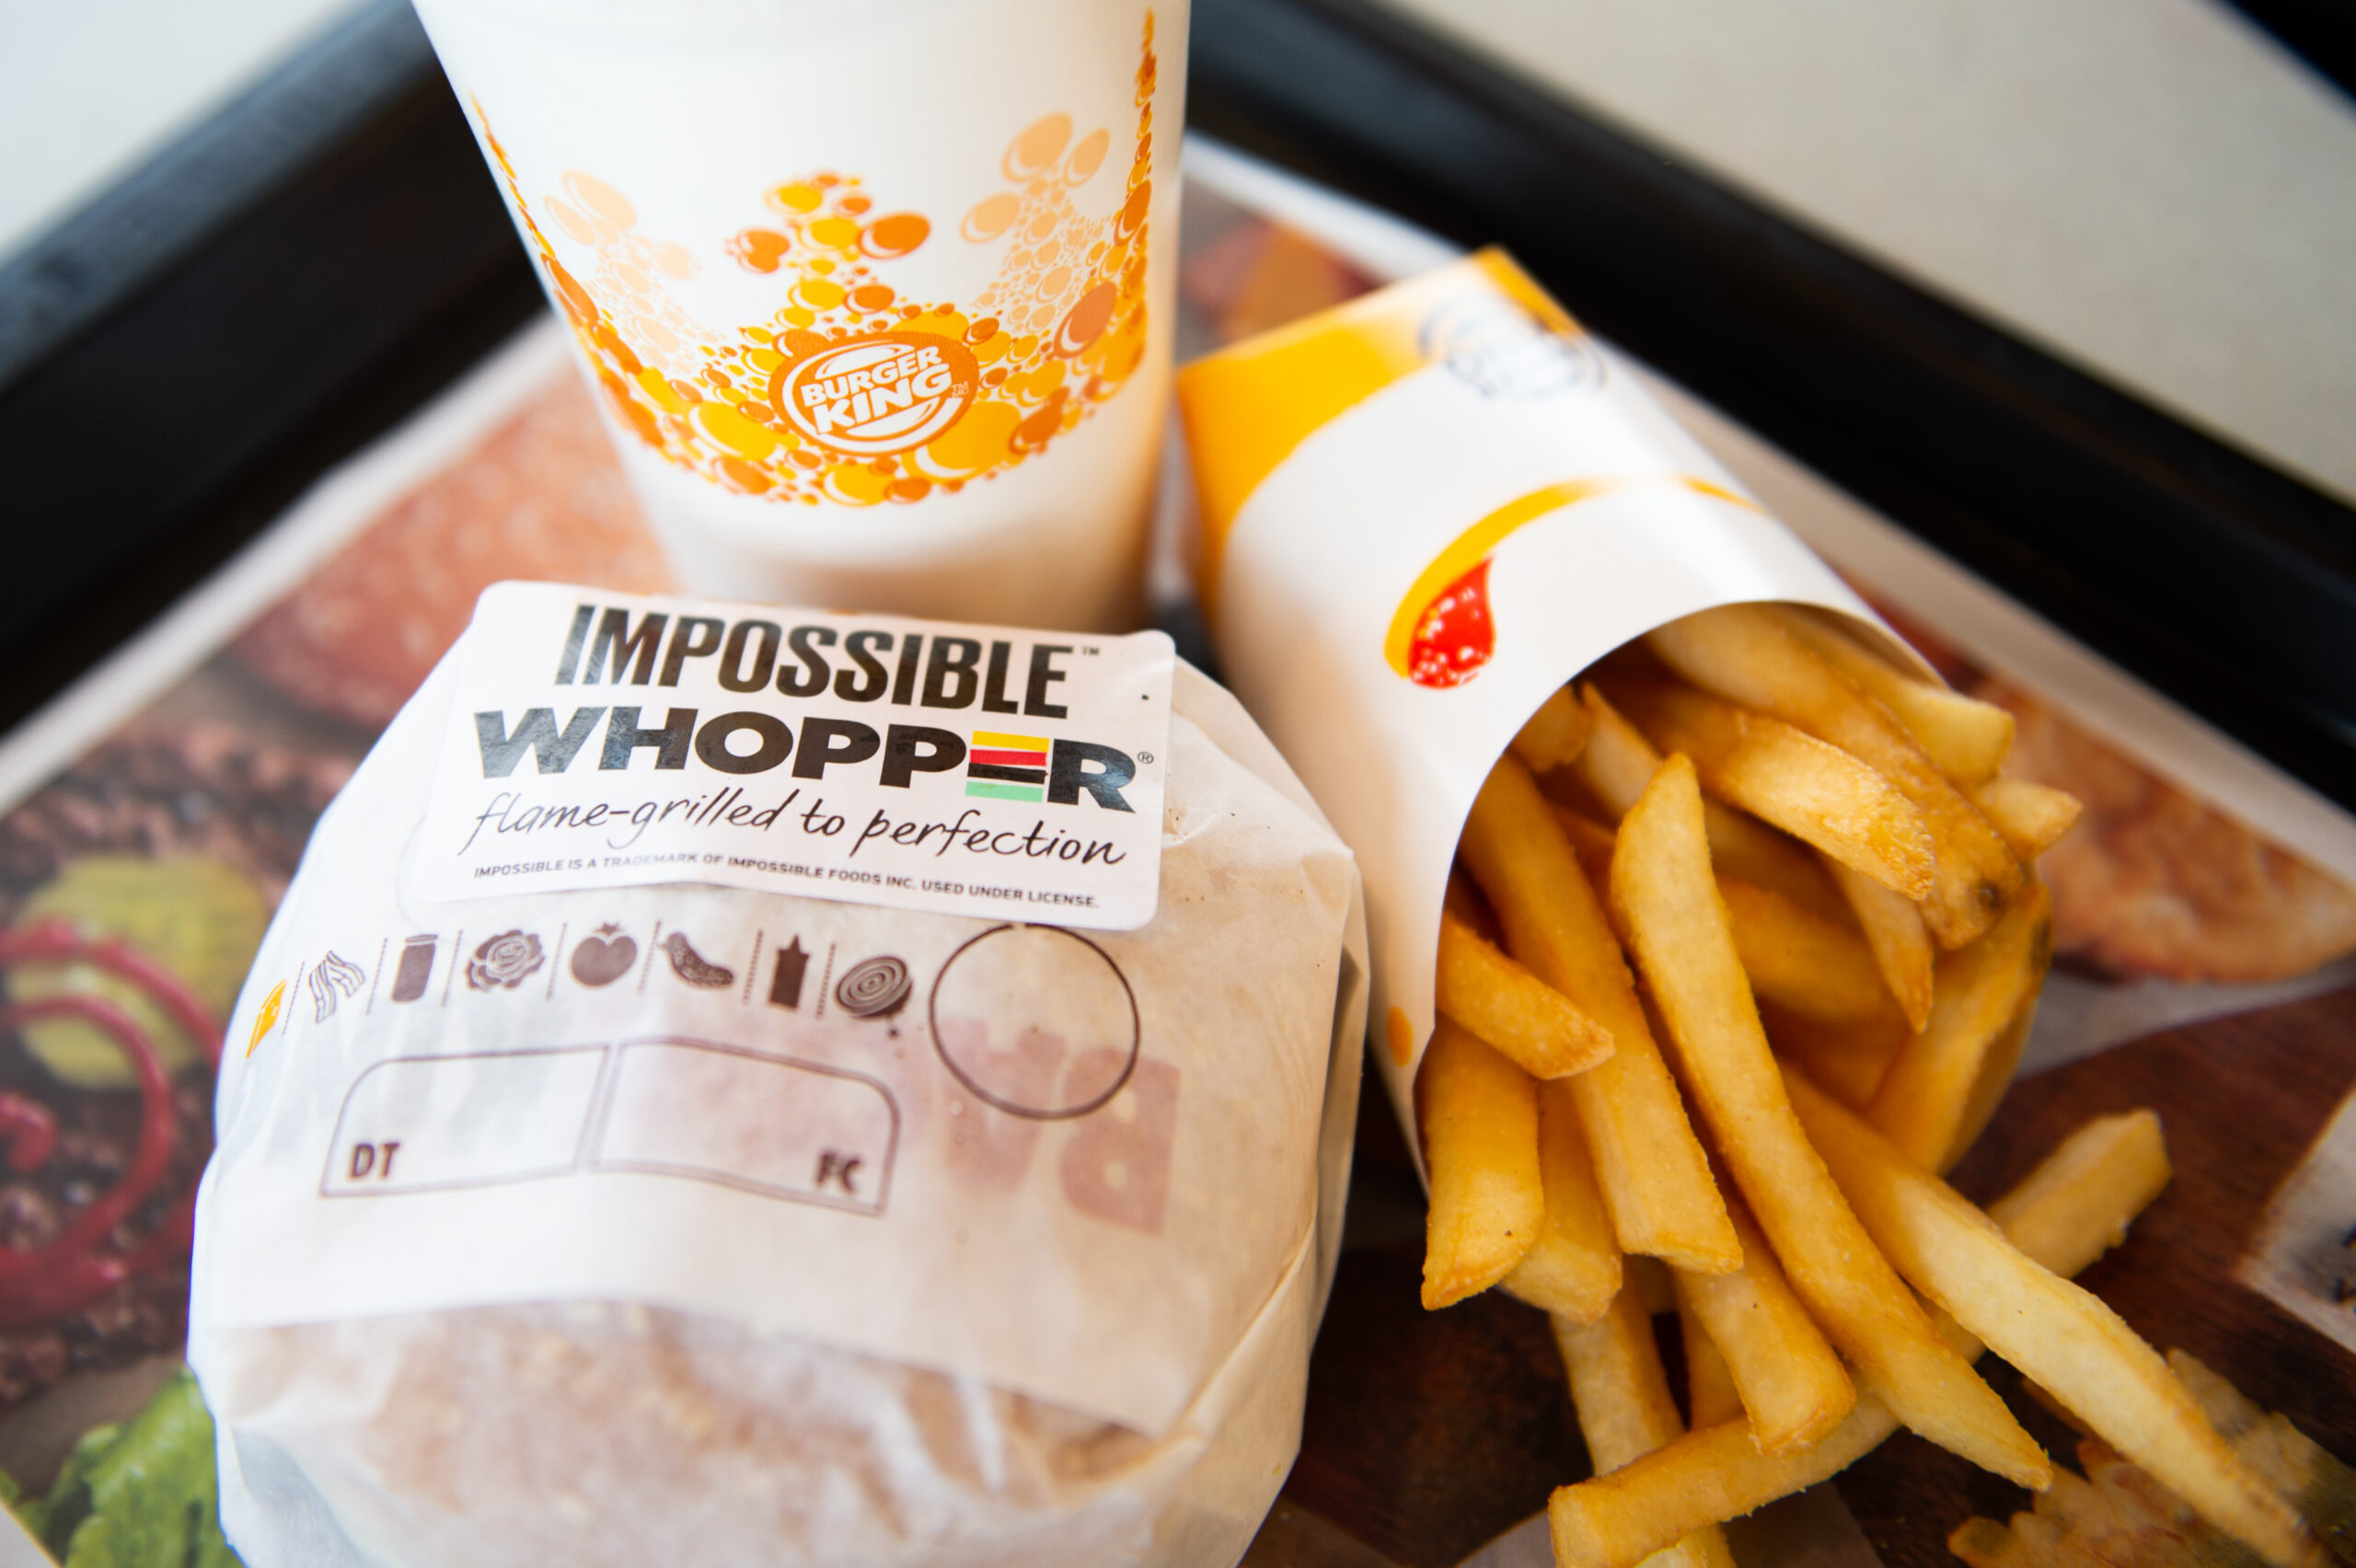 Burger King's plant-based Impossible Whopper drew traffic in test market.